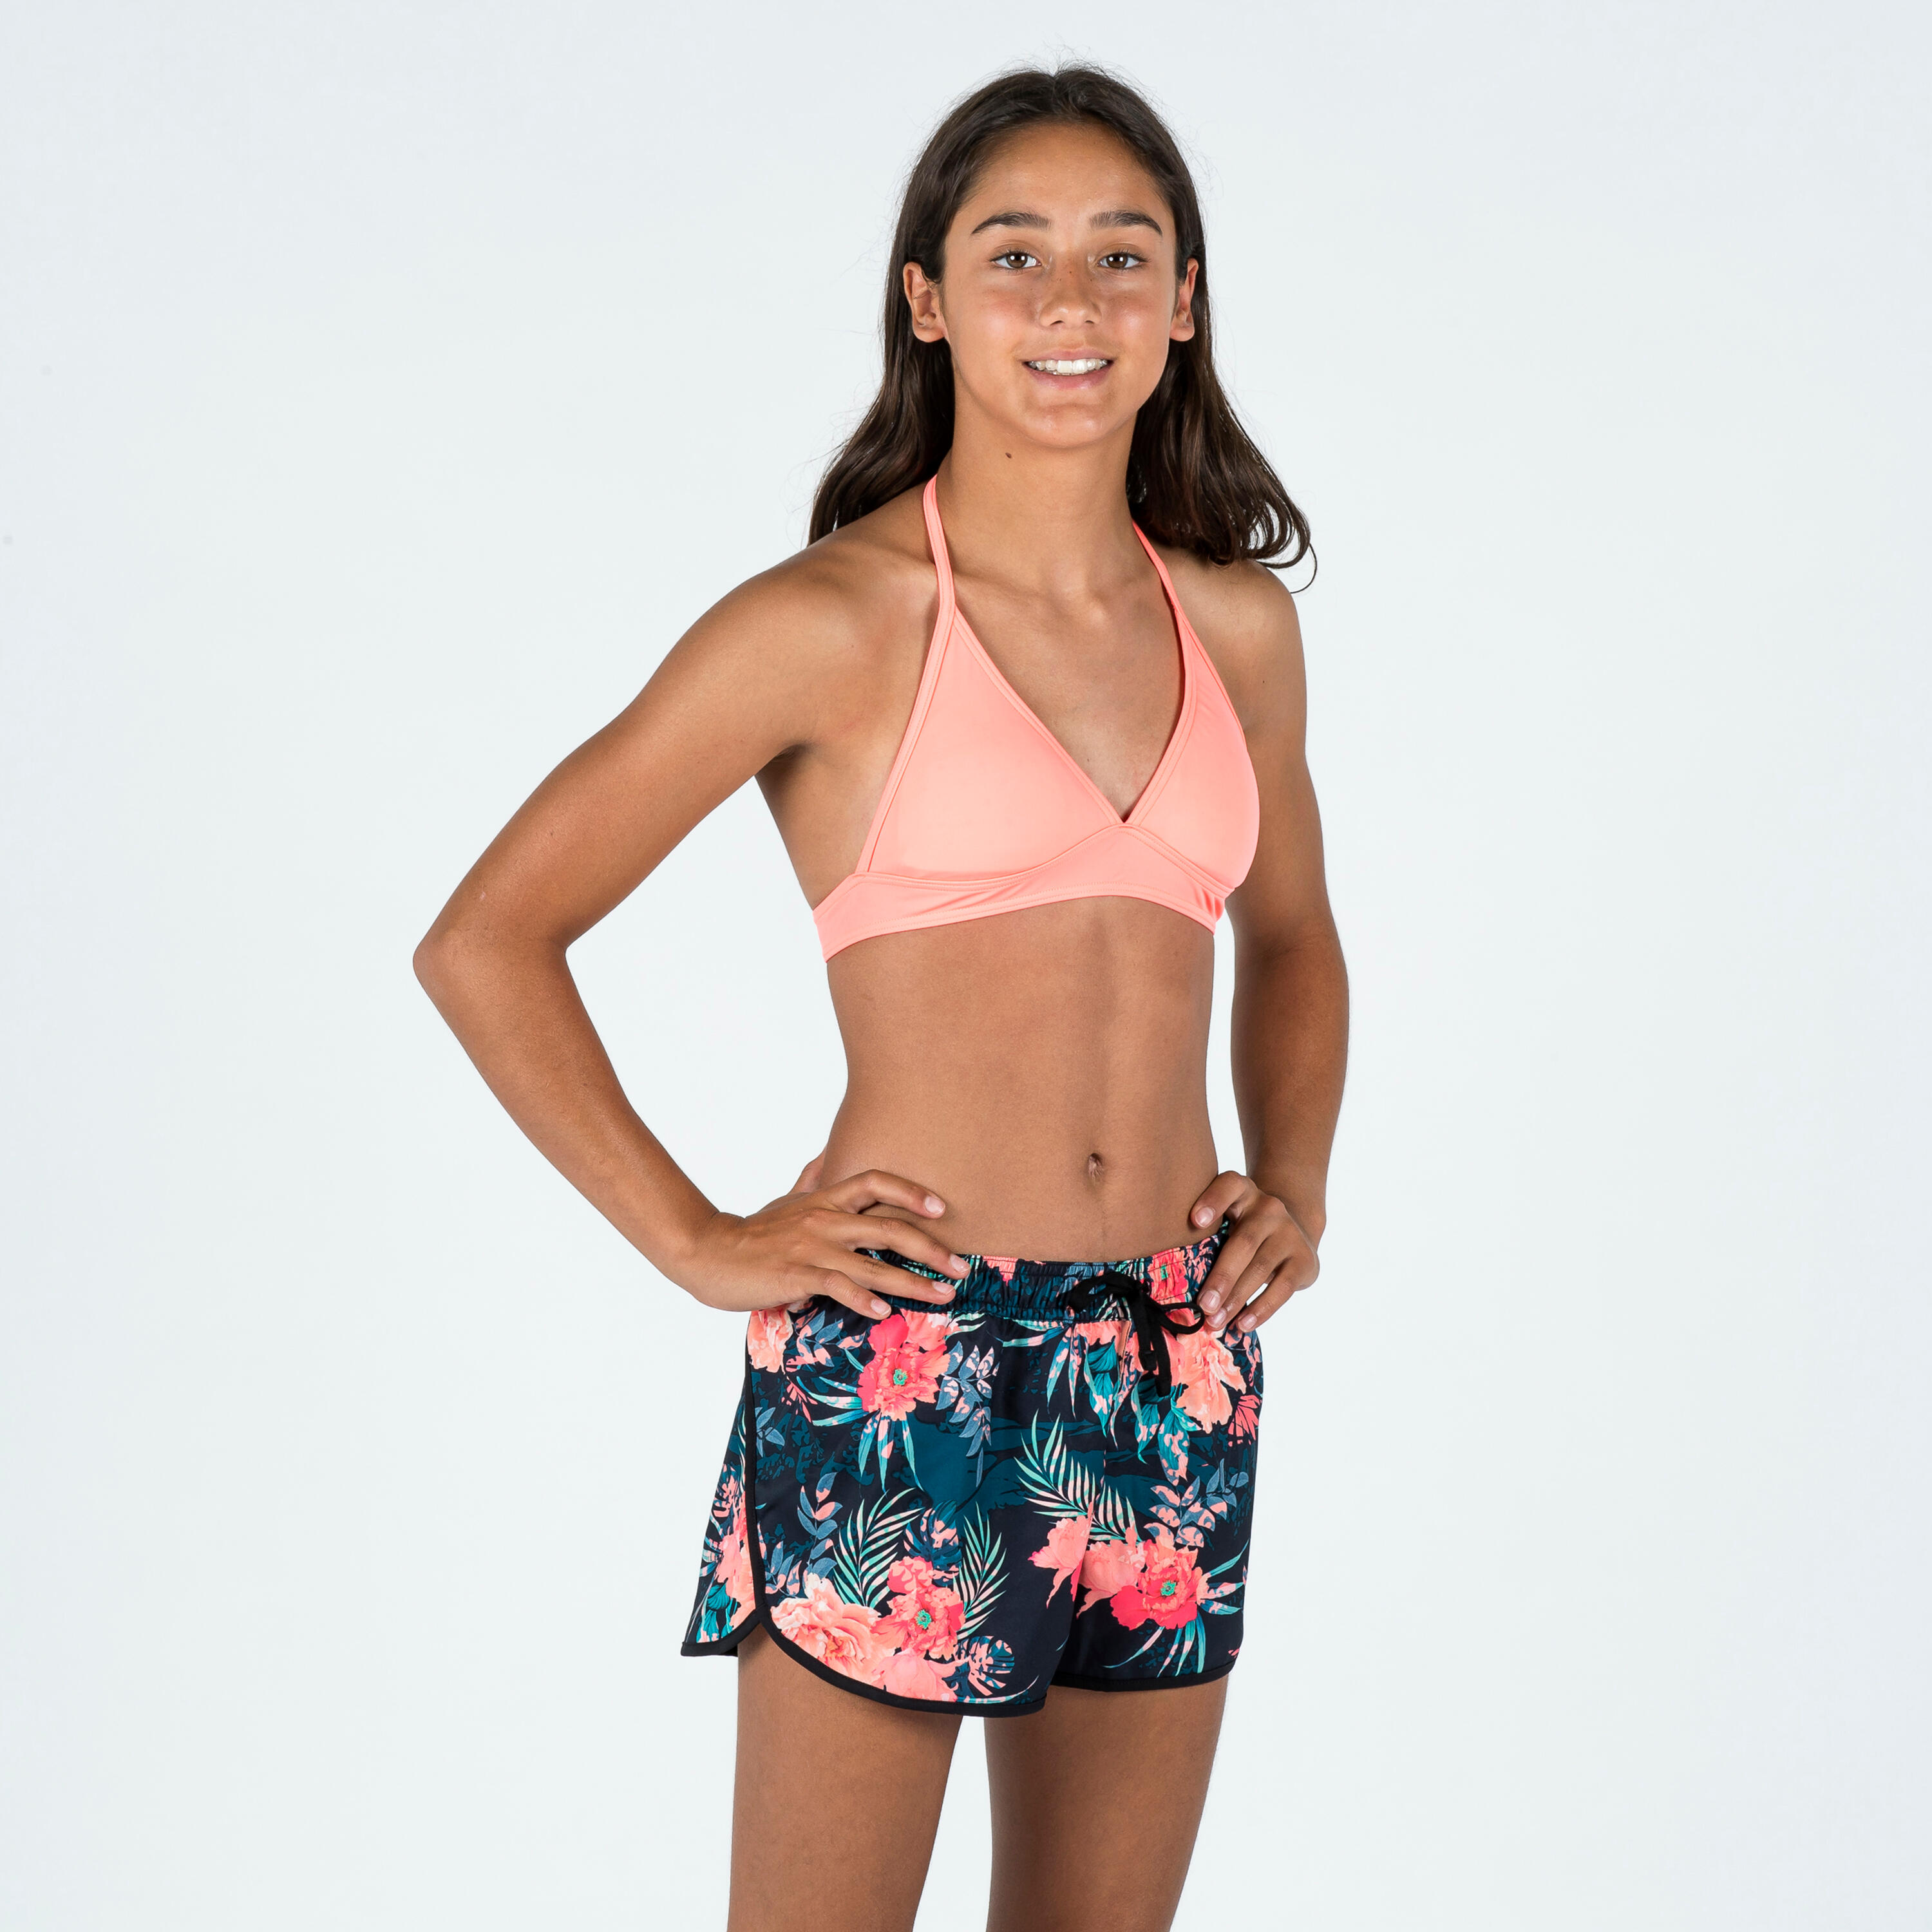 OLAIAN Girl's scarf swimsuit top - 100 Tami coral